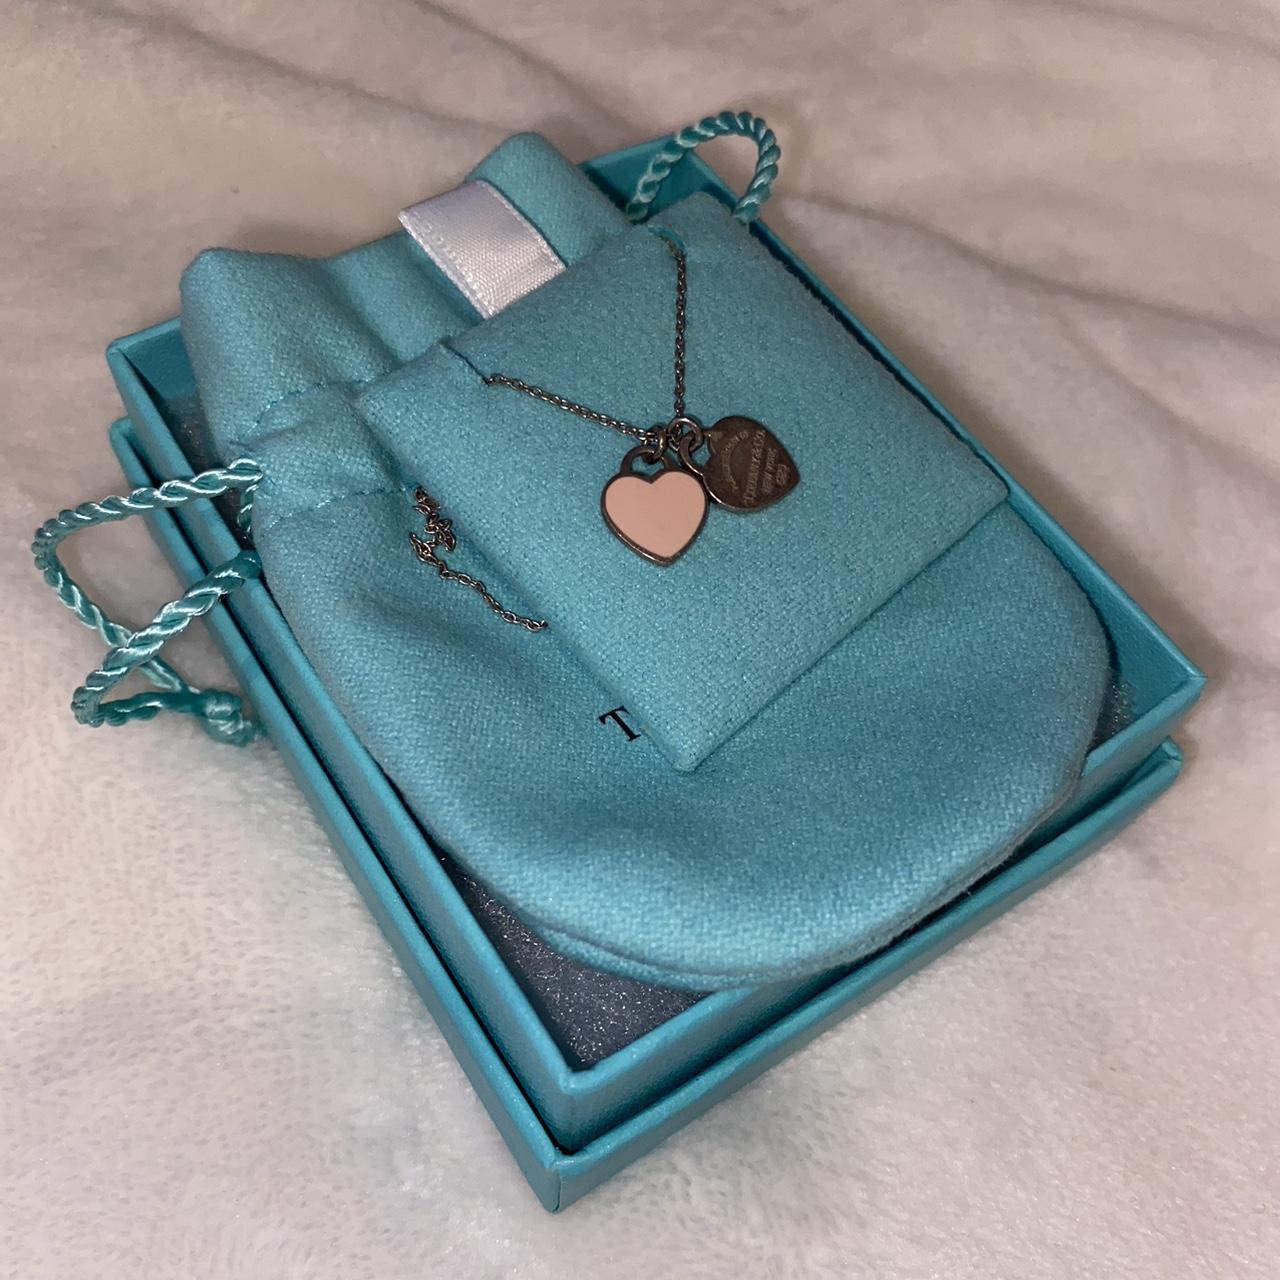 Tiffany & Co. Double Heart Tag Pendant Necklace – I MISS YOU VINTAGE